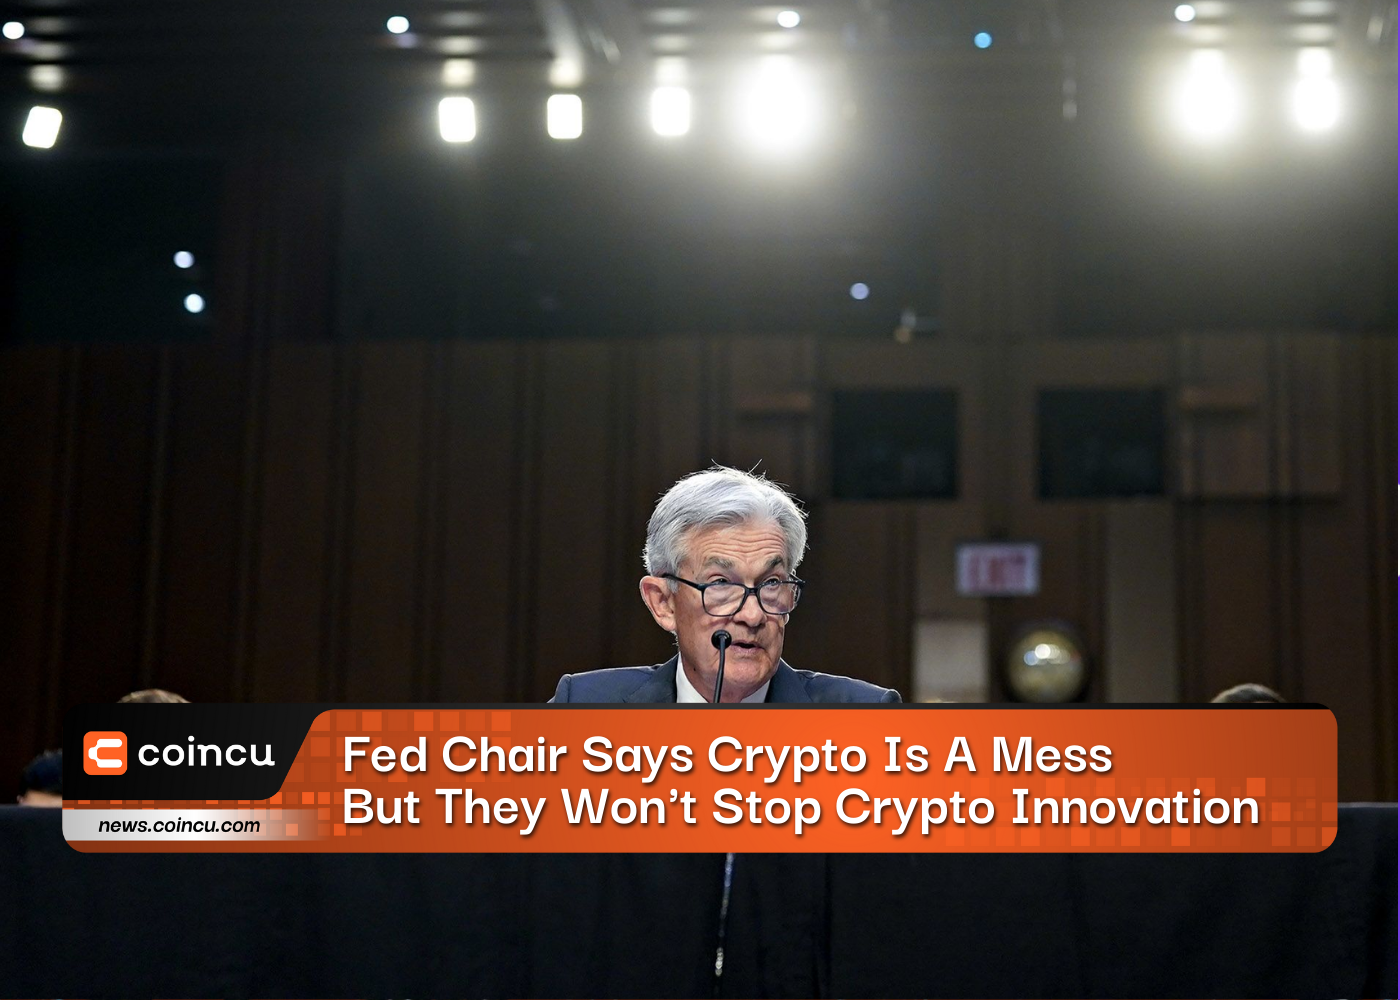 Fed Chair Says Crypto Is A Mess But They Won't Stop Crypto Innovation